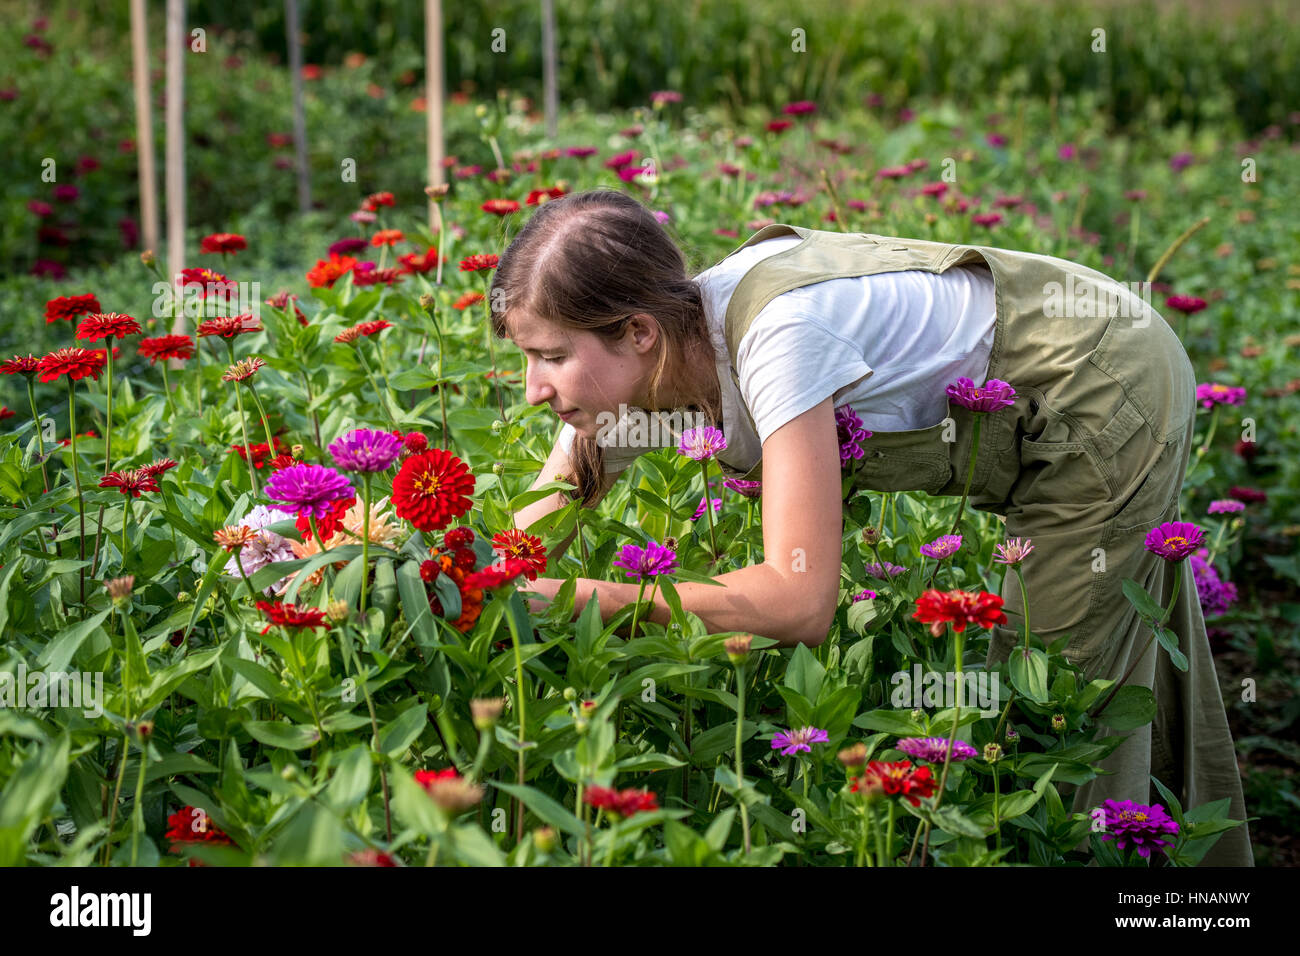 Woman leaning down to cut some fresh flowers from a garden on a farm in rural Maryland. Stock Photo